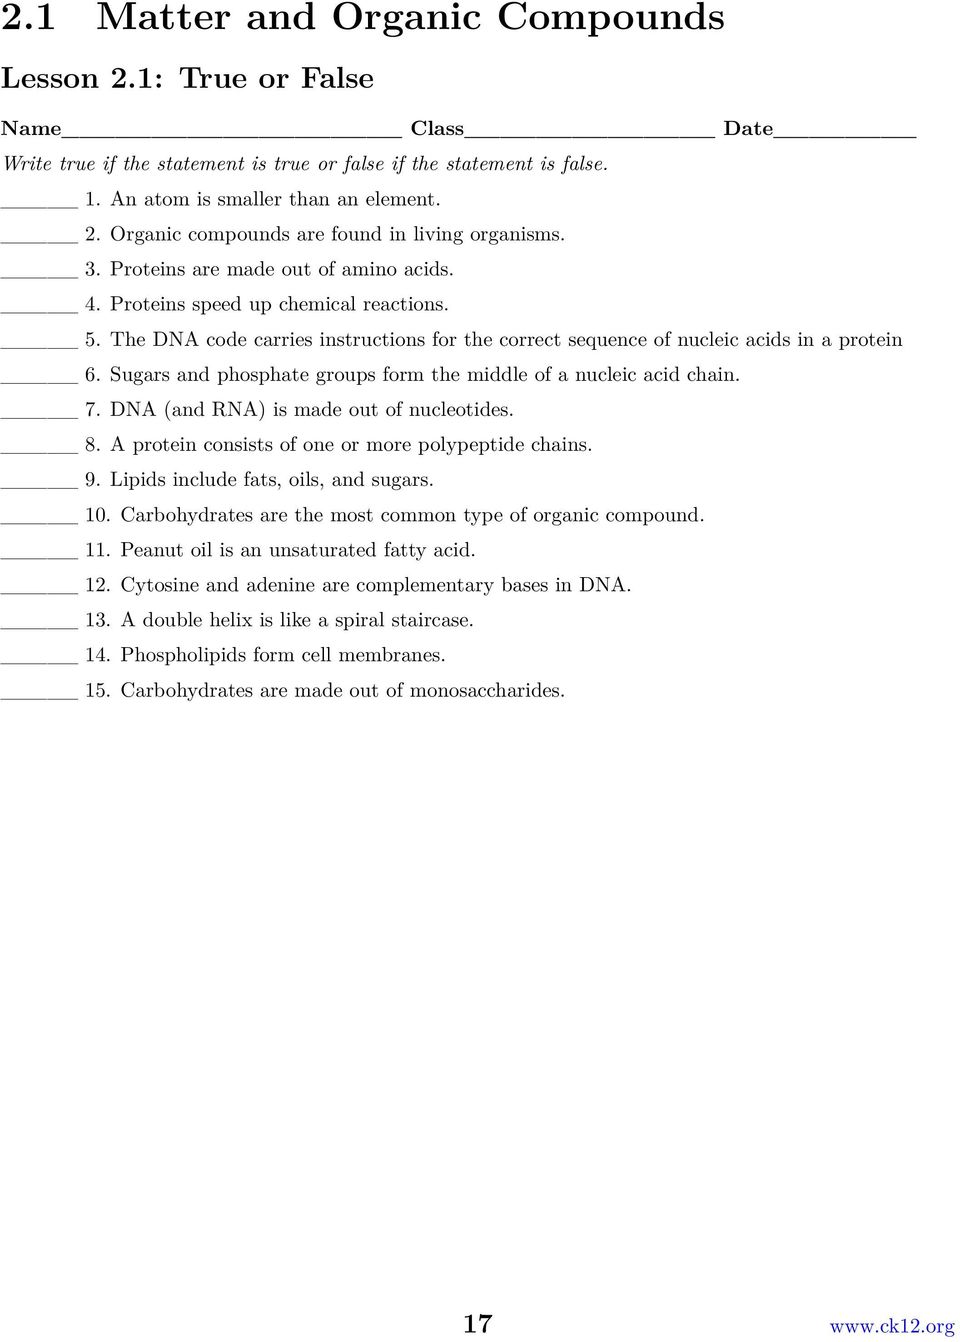 Chapter 22. The Chemistry of Life Worksheets - PDF Free Download Intended For Chemistry Of Life Worksheet